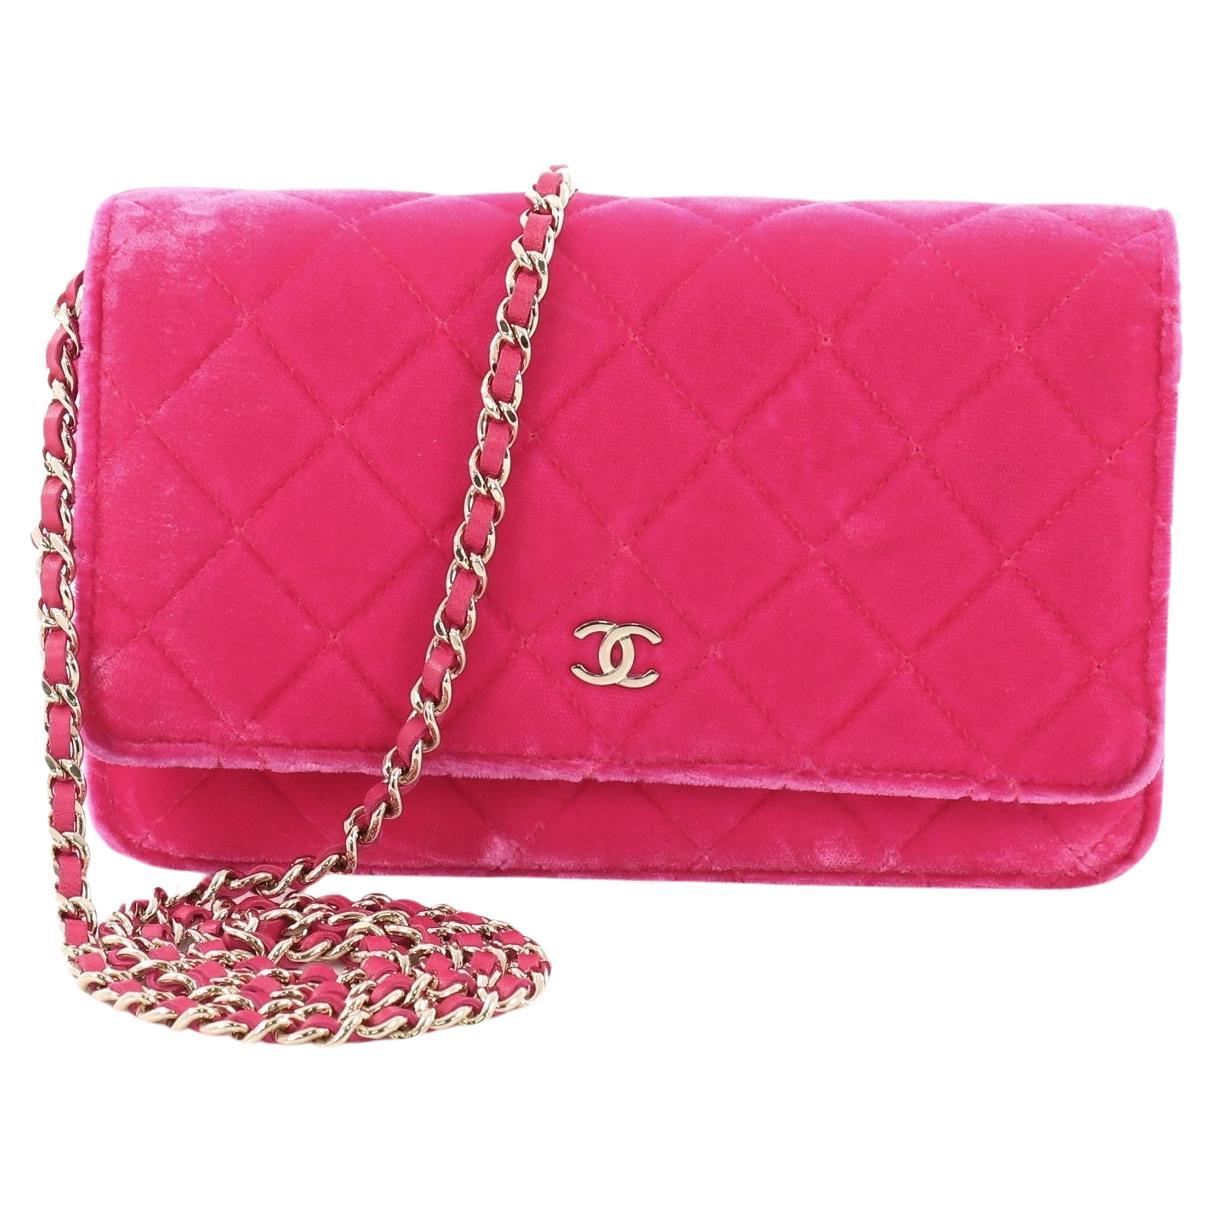 Chanel 2014 Velvet Neon Pink Wallet on Chain WOC Crossbody Flap Bag For Sale